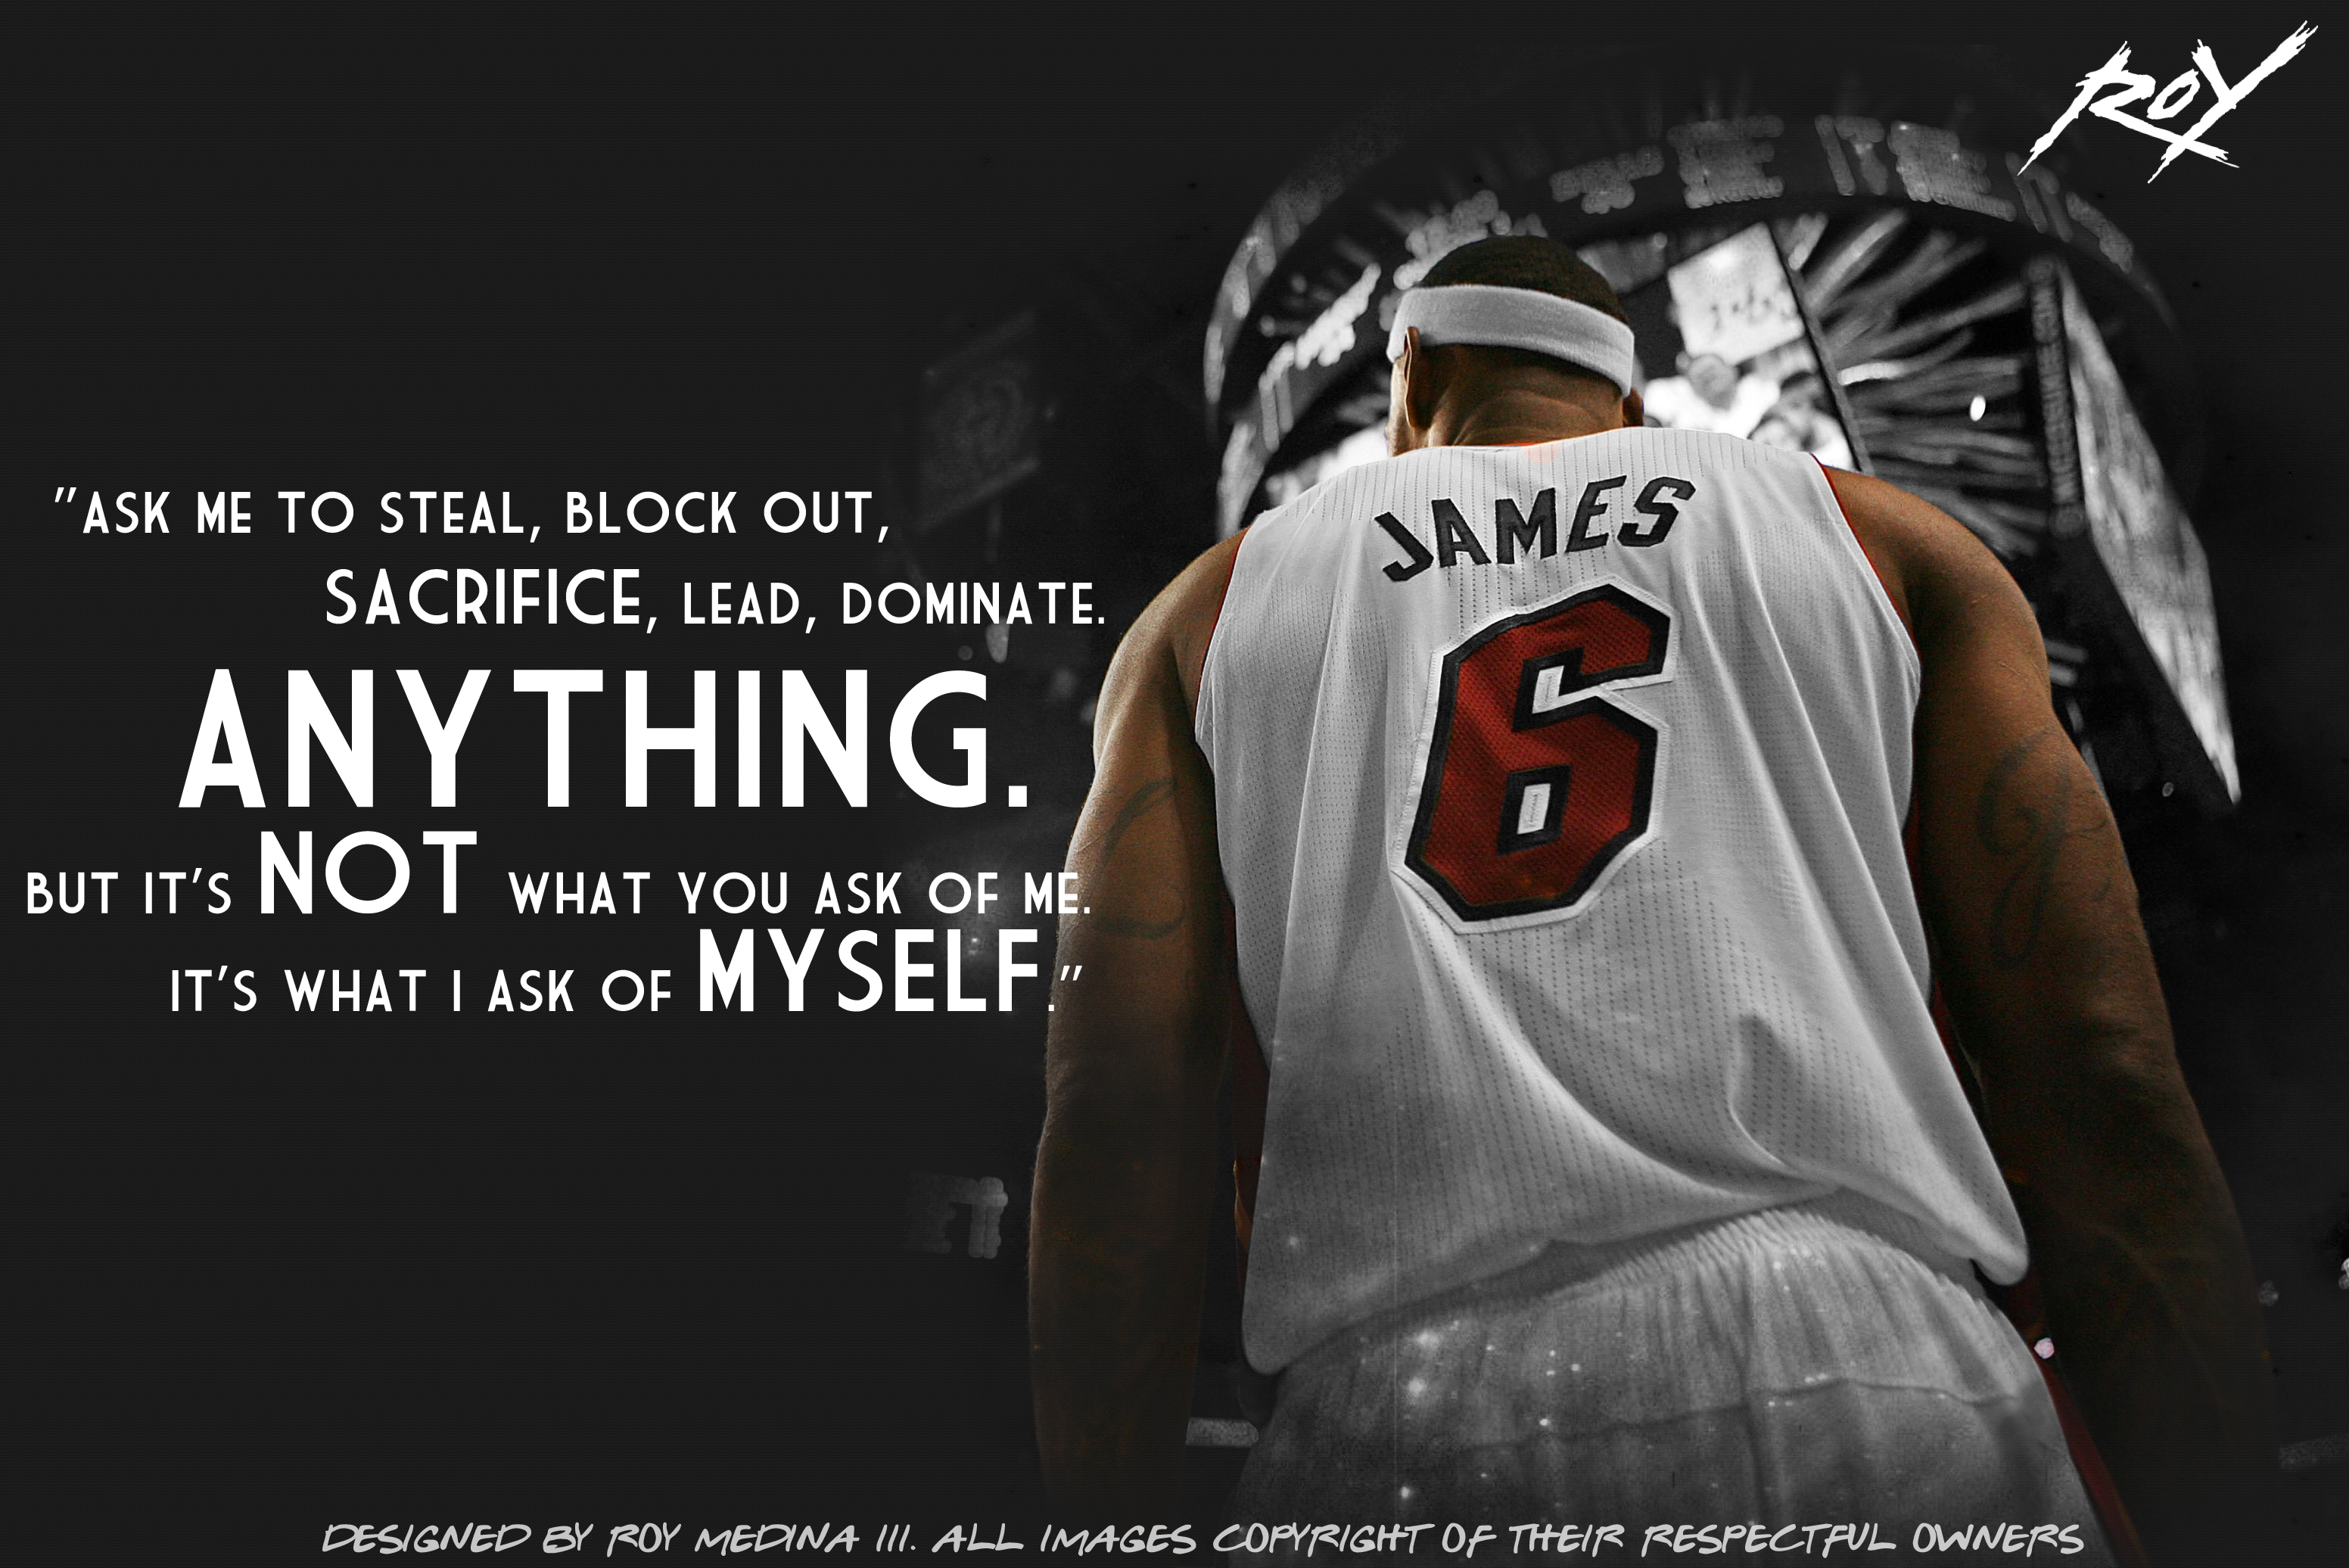 Lebron James Quote by Roy03x on DeviantArt